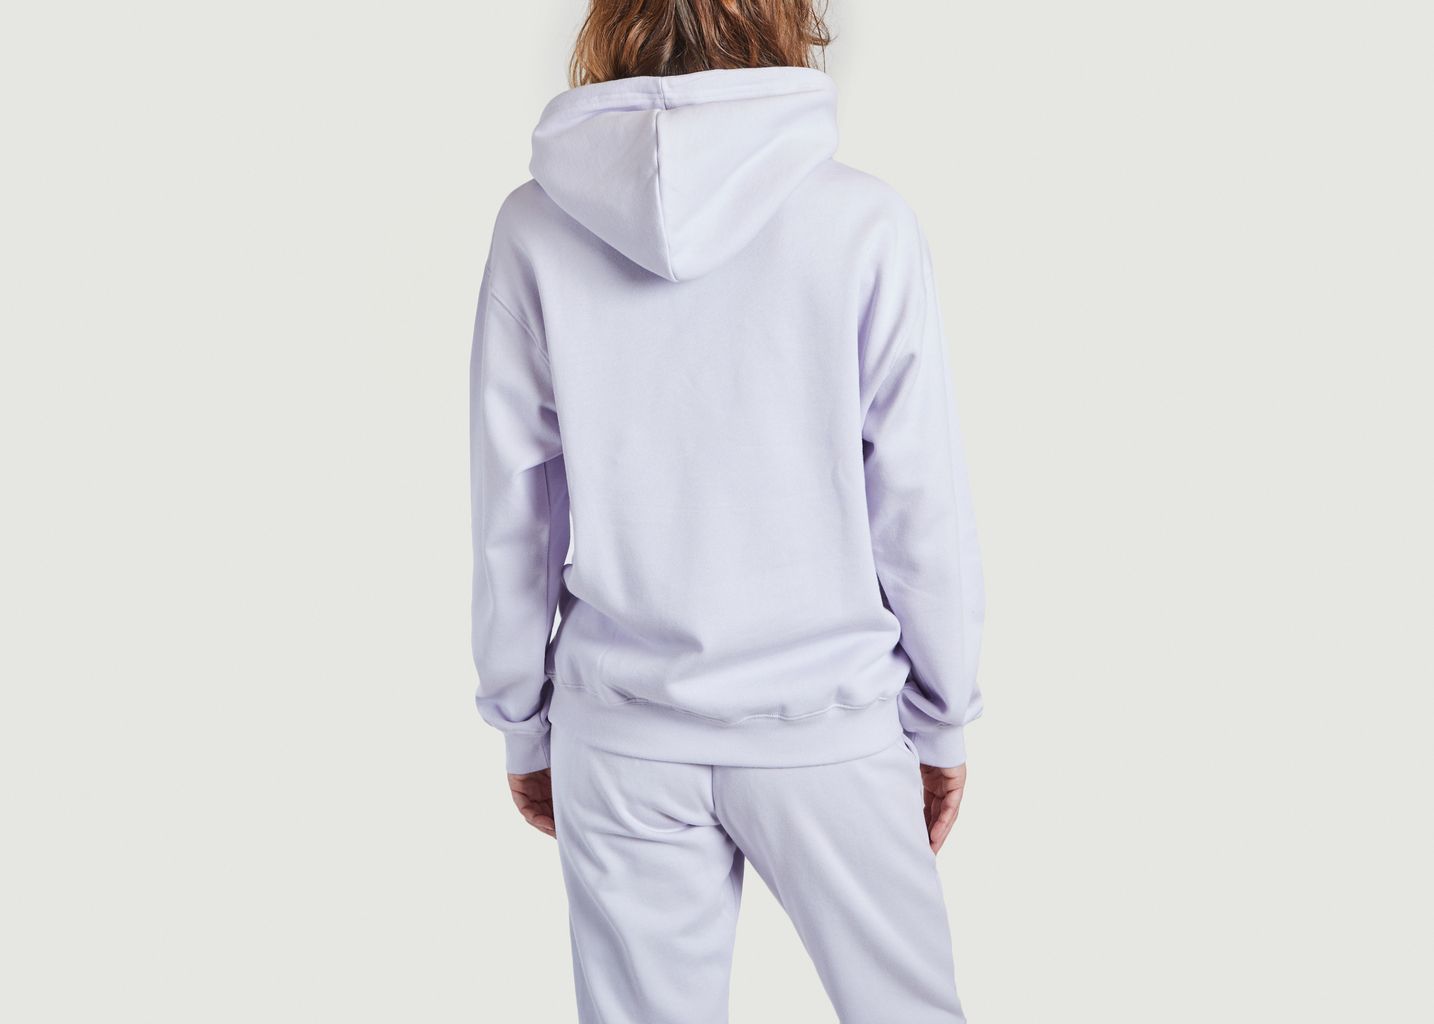 Hoodie Reaumur Truth and Dare  - Maison Labiche